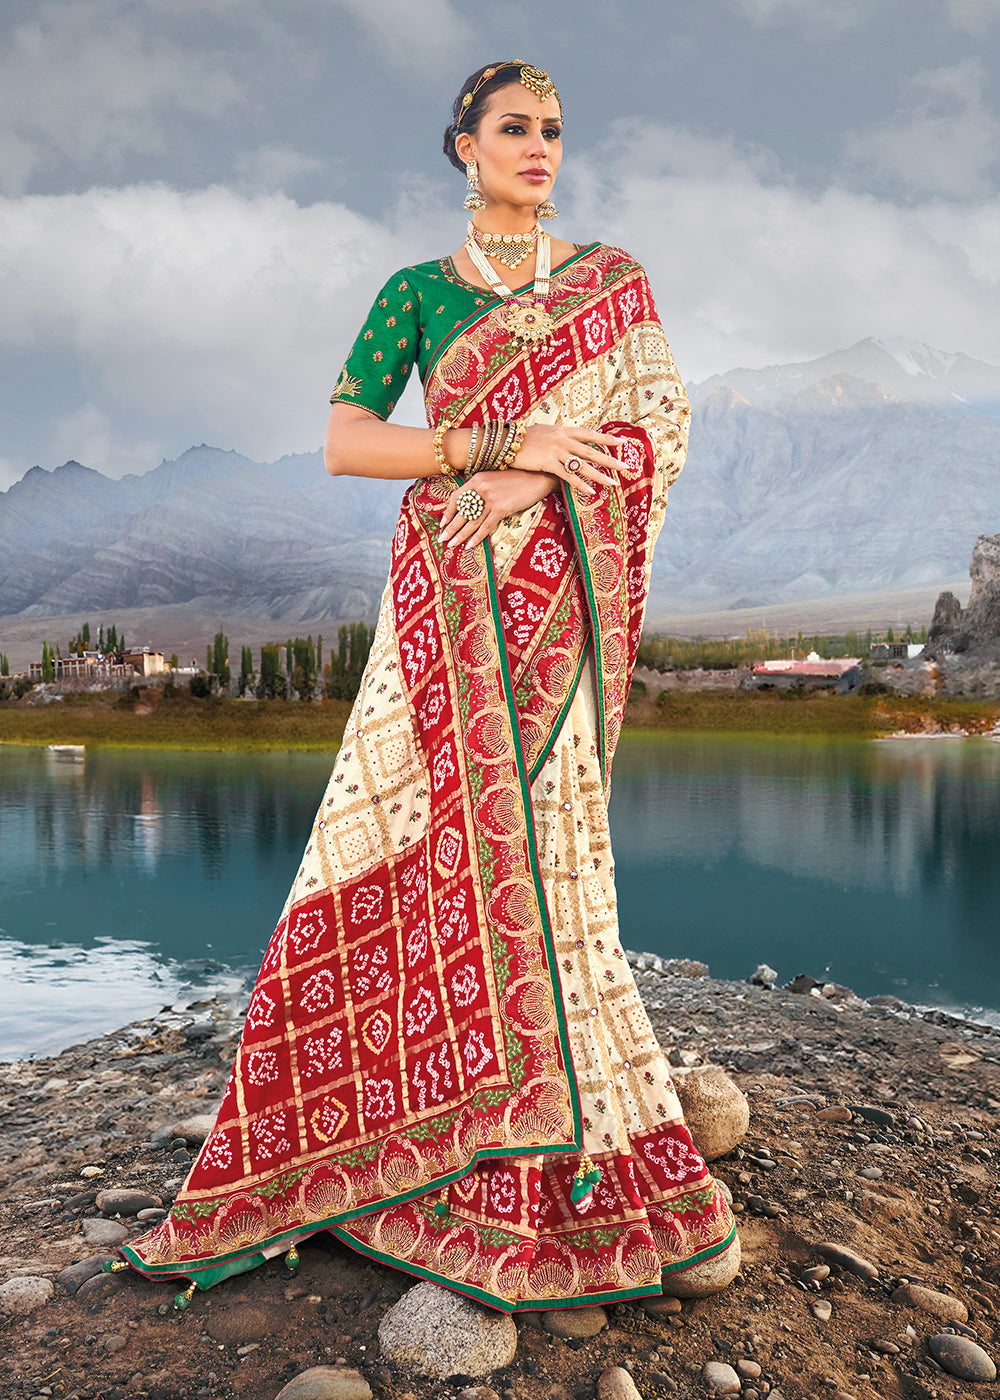 Shop Now Traditional Cream Embroidered Kachhi Bandhej Sateen Saree Saree from Empress Clothing in USA, UK, Canada & Worldwide. 